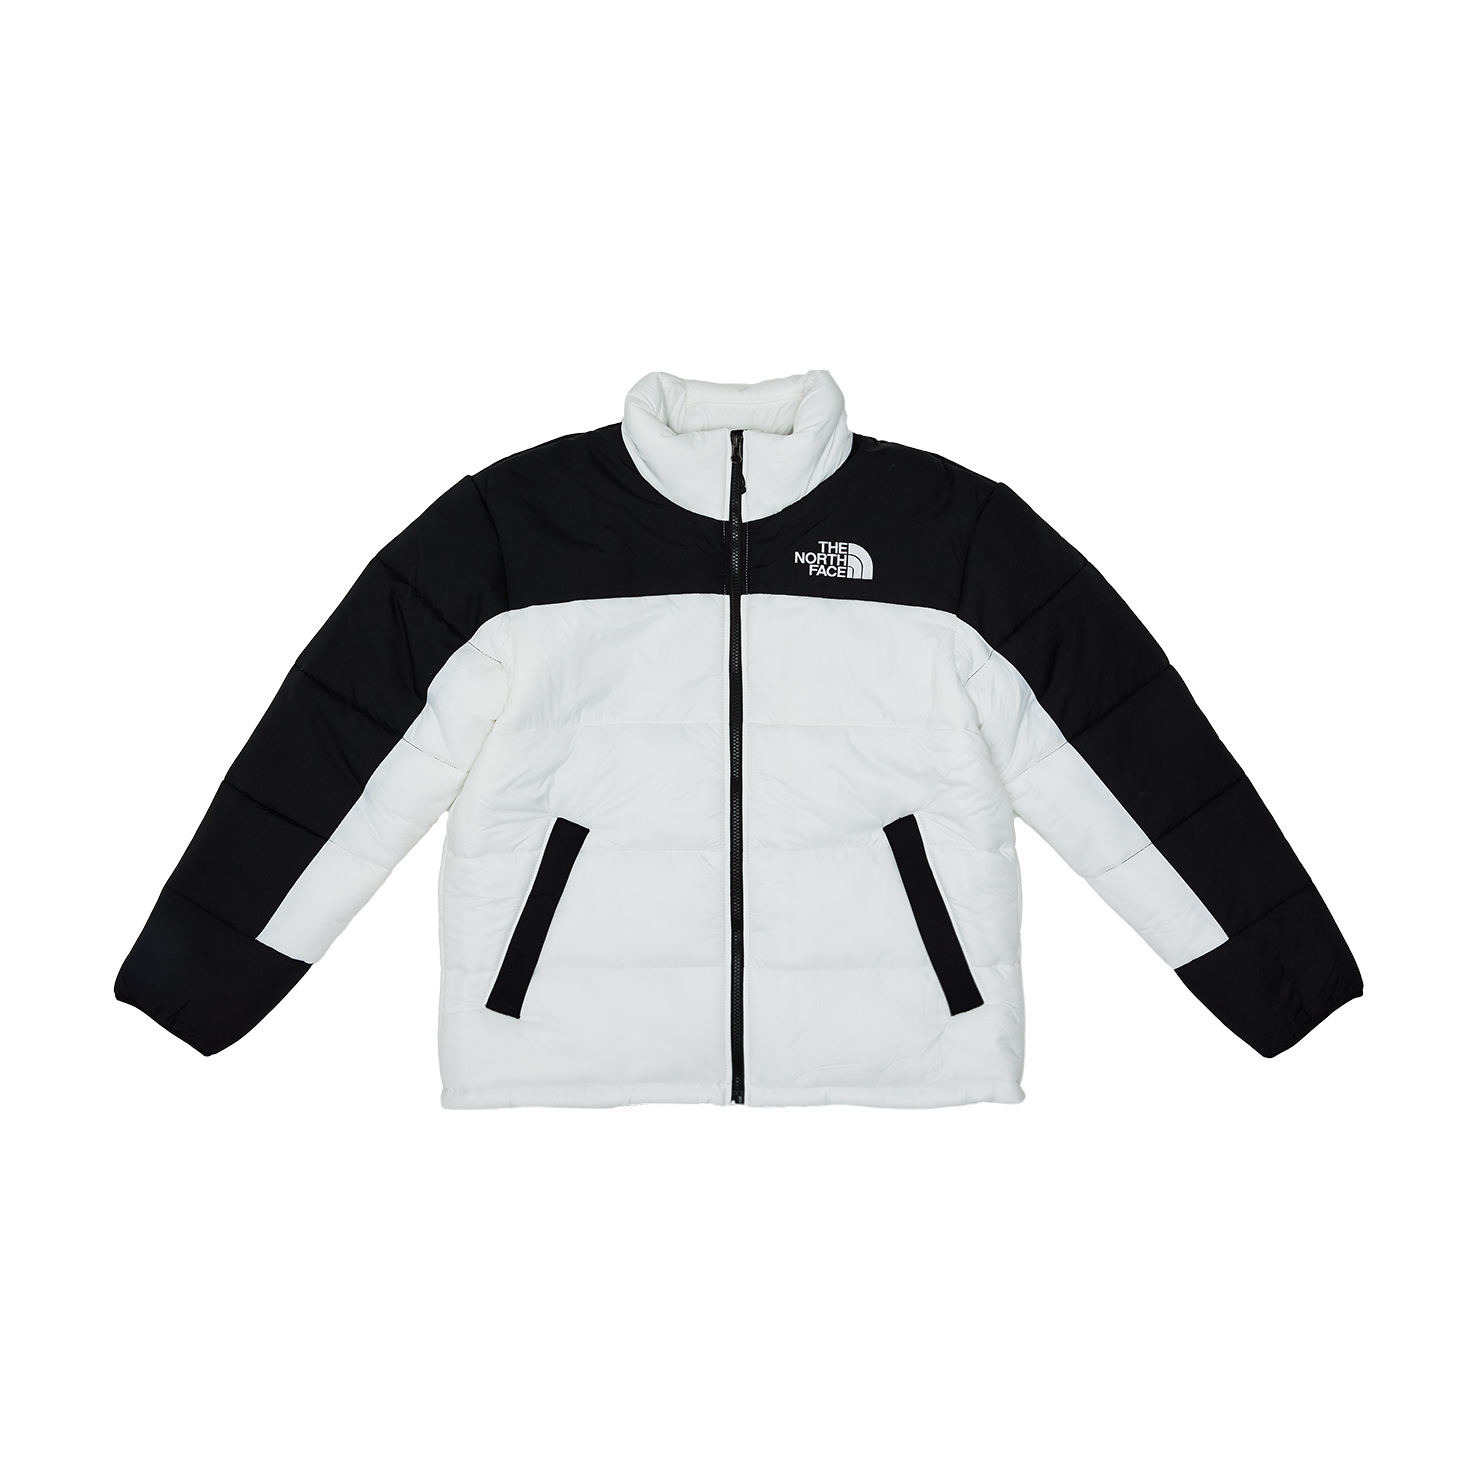 Hmlyn Insulated Jacket NORTH FACE серого цвета